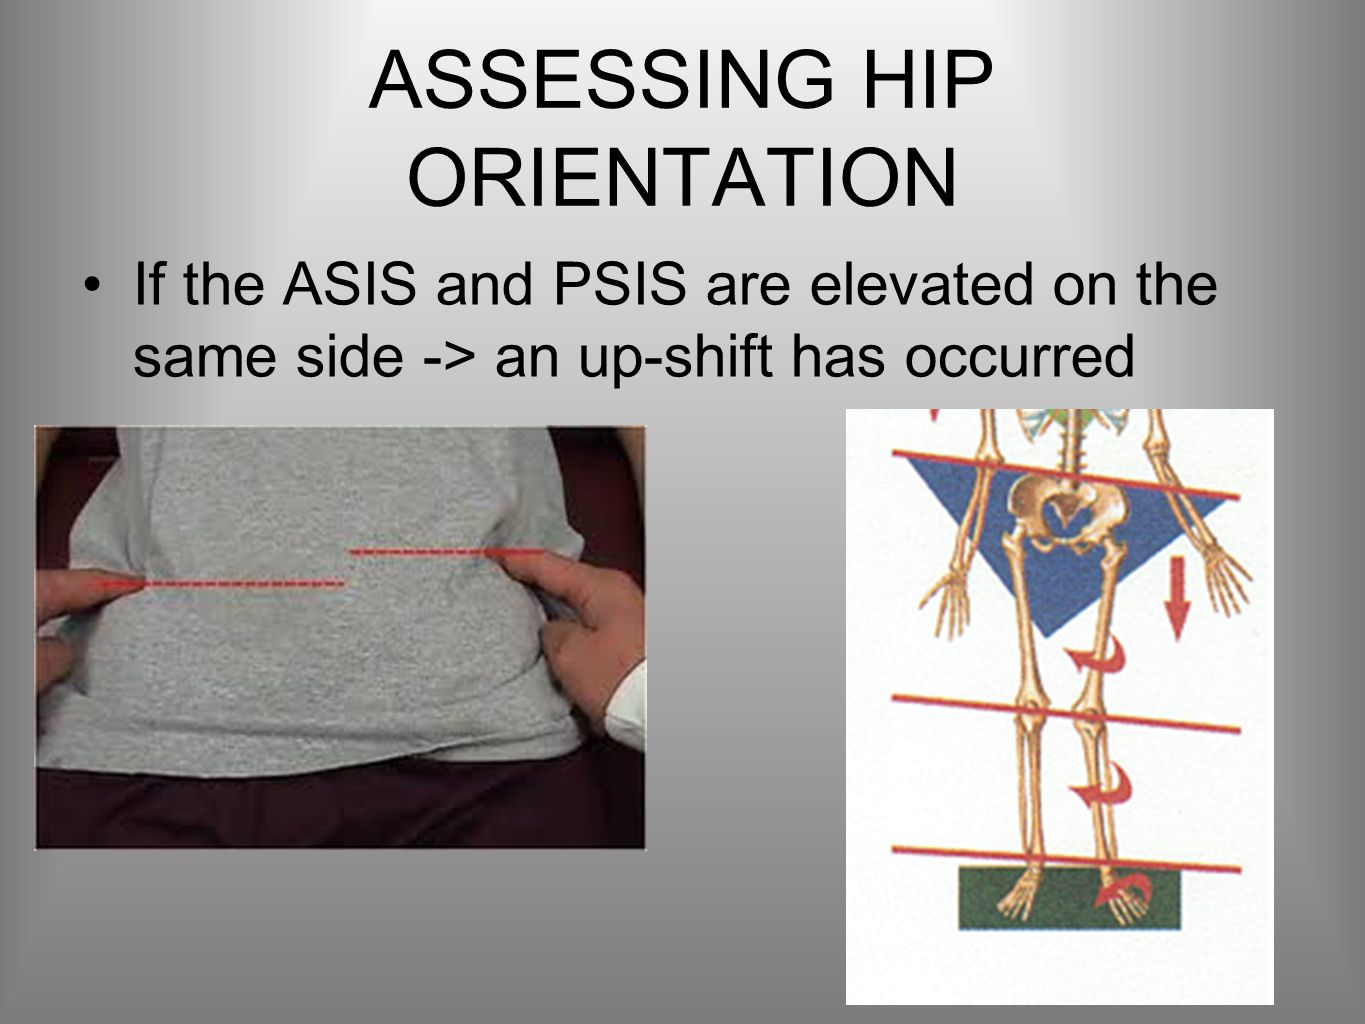 ASSESSING HIP ORIENTATION If the ASIS and PSIS are elevated on the same side -> an up-shift has occurred